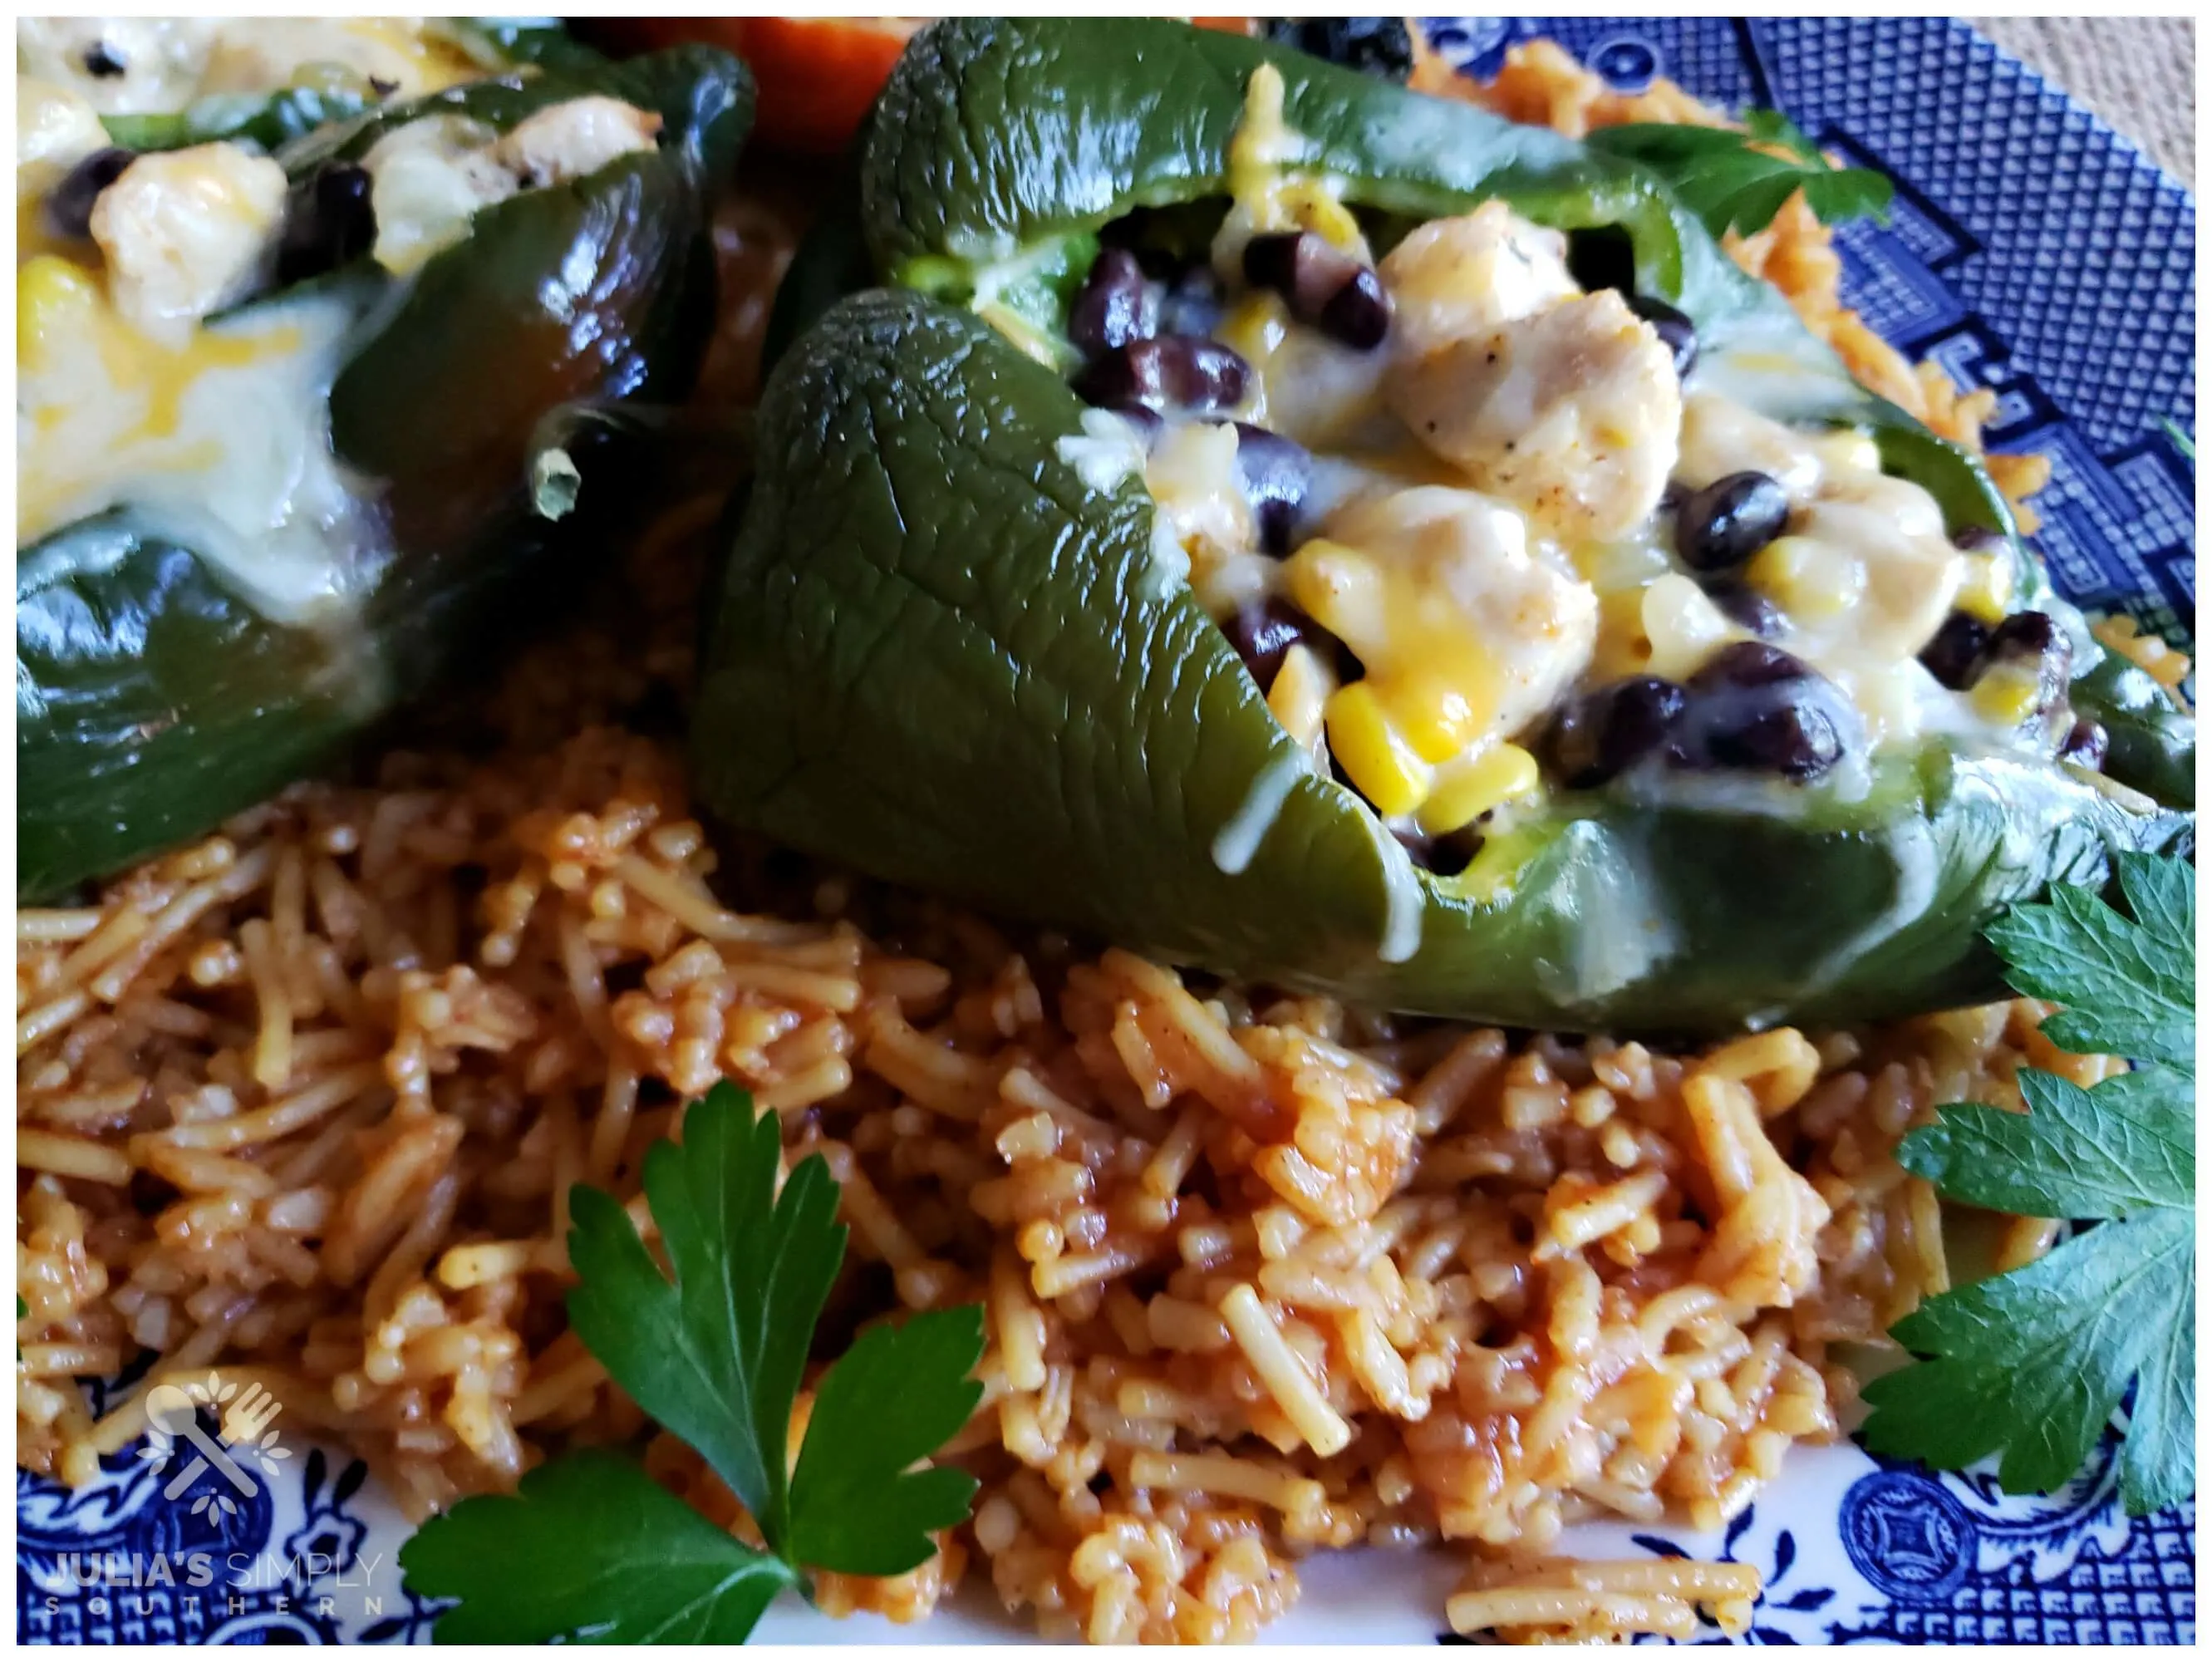 Spanish rice with stuffed poblano peppers are a delicious Southwestern style meal